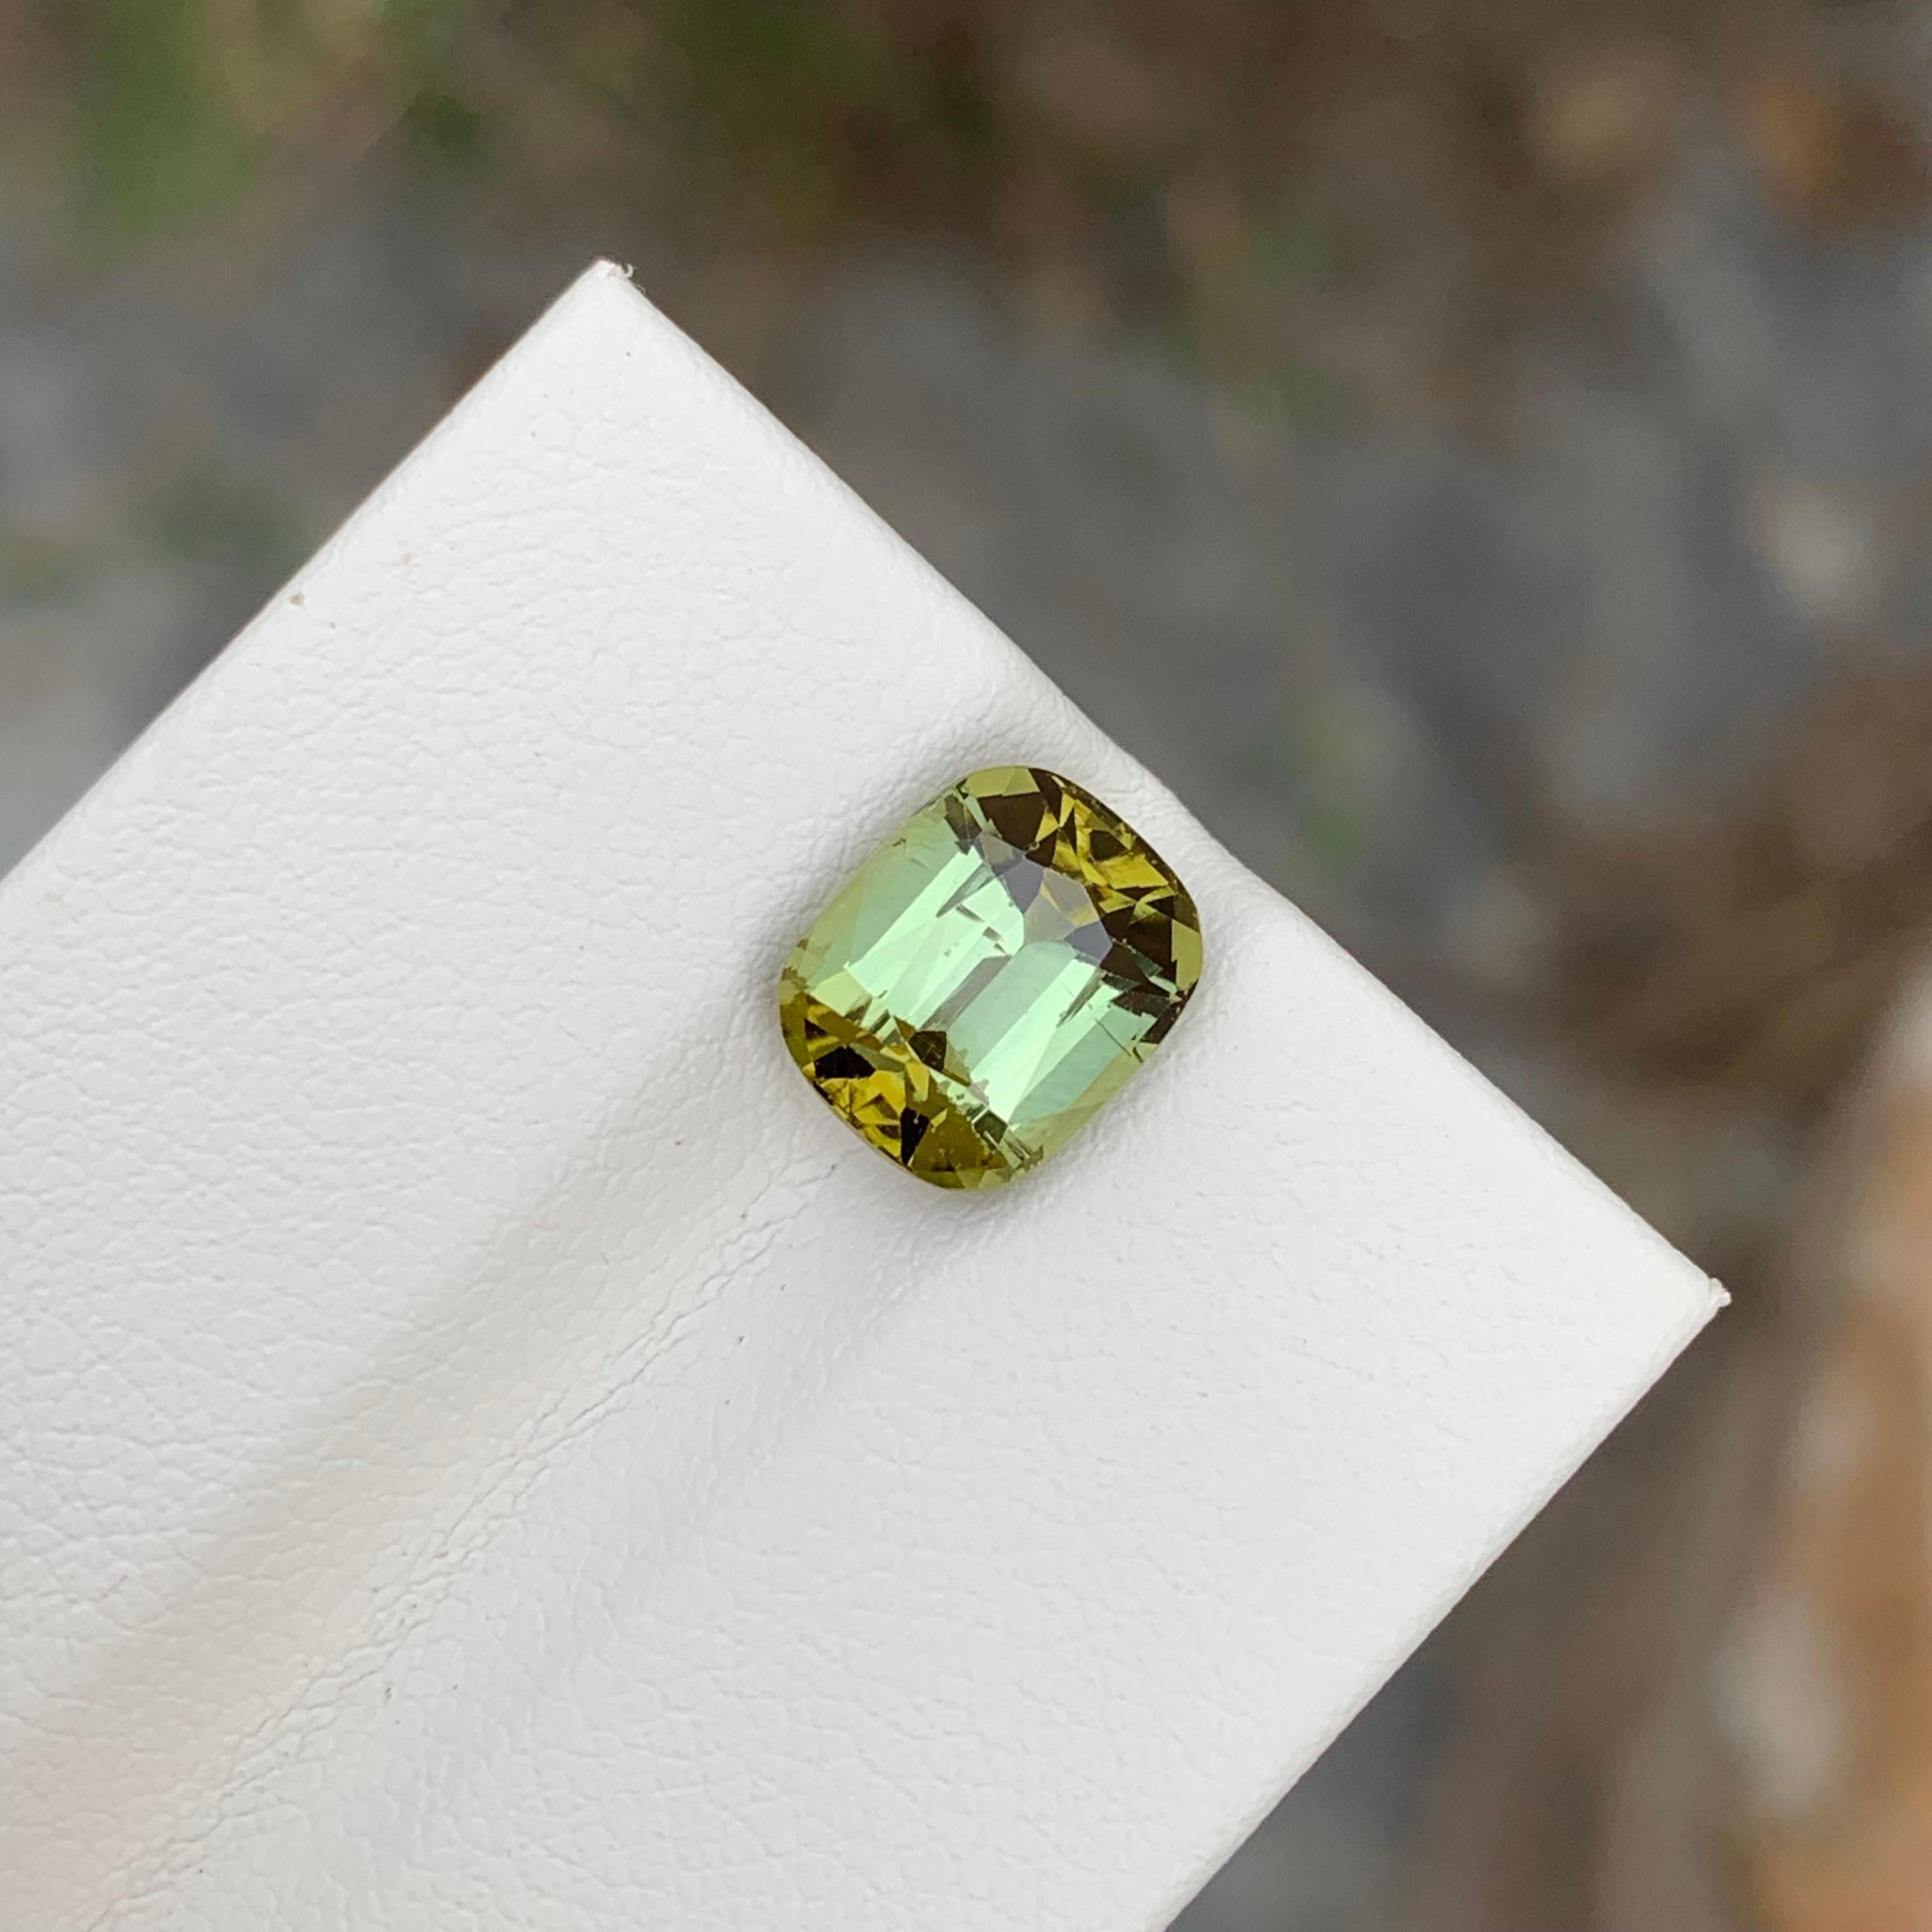 Loose Tourmaline

Weight: 2.85 Carats
Dimension: 9 x 7.5 x 5.6 Mm
Colour: Greenish Yellow 
Origin: Africa
Certificate: On Demand
Treatment: Non

Tourmaline is a captivating gemstone known for its remarkable variety of colors, making it a favorite